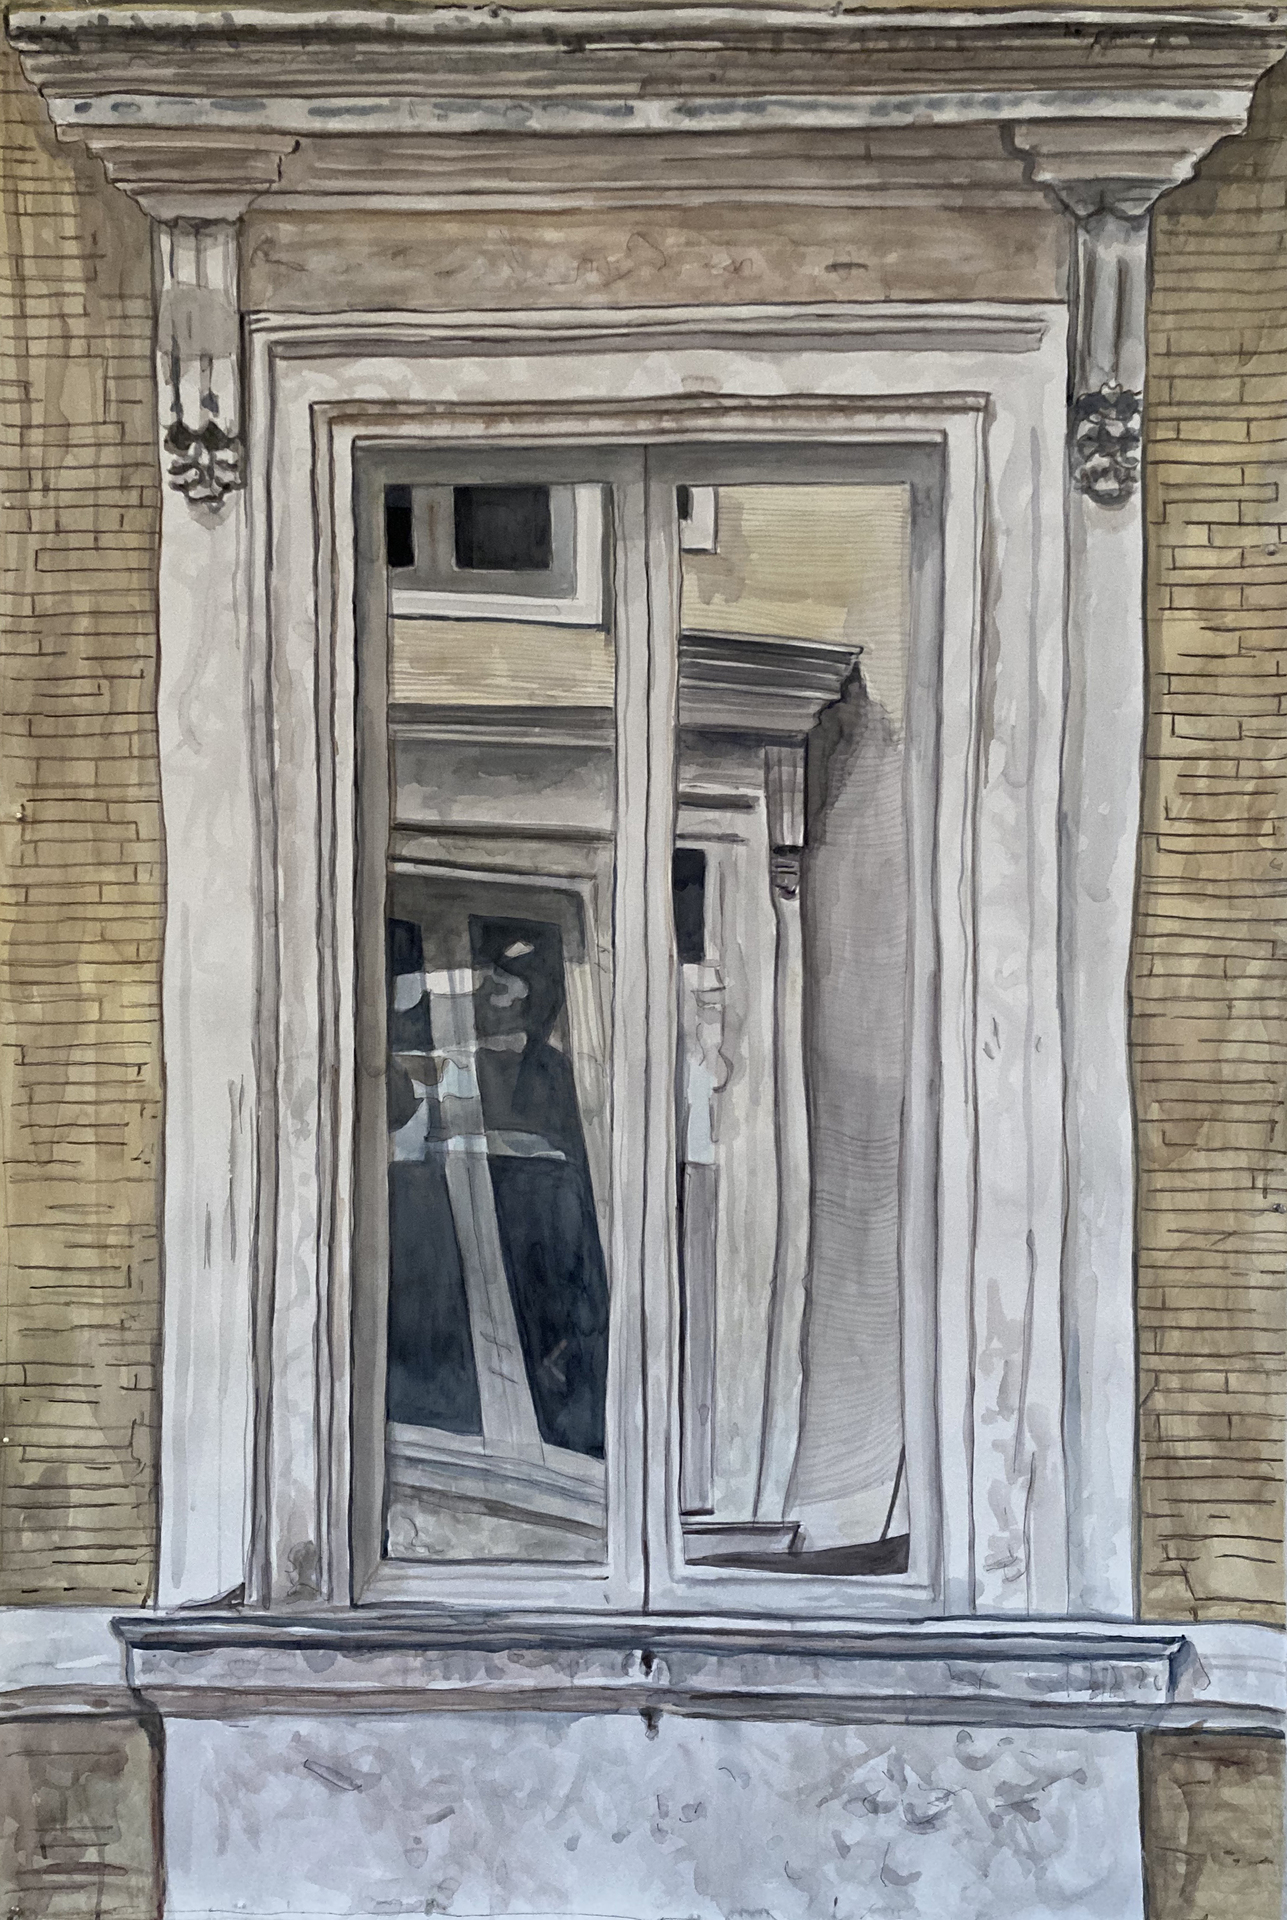 watercolor painting of a window reflecting off another window of a beige brick building.